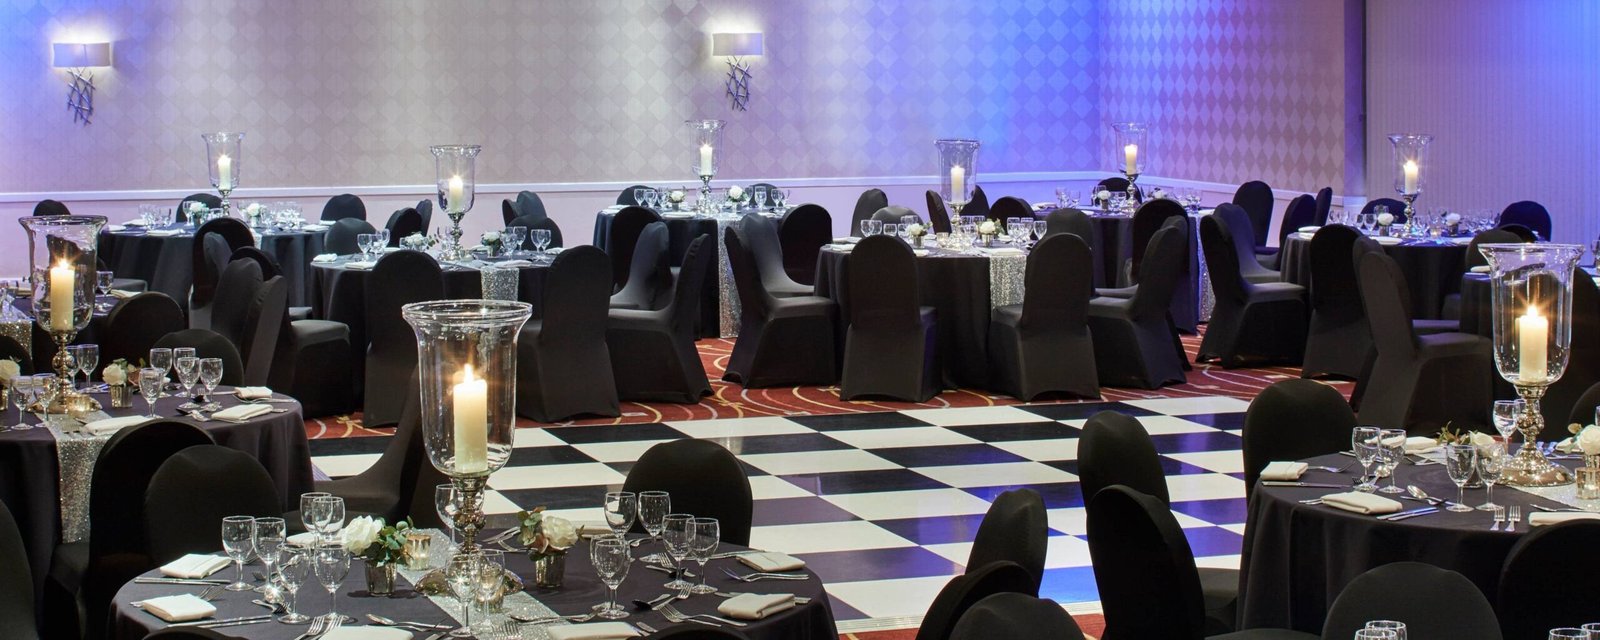 What Are The Benefits Of Function Room For Your Event?